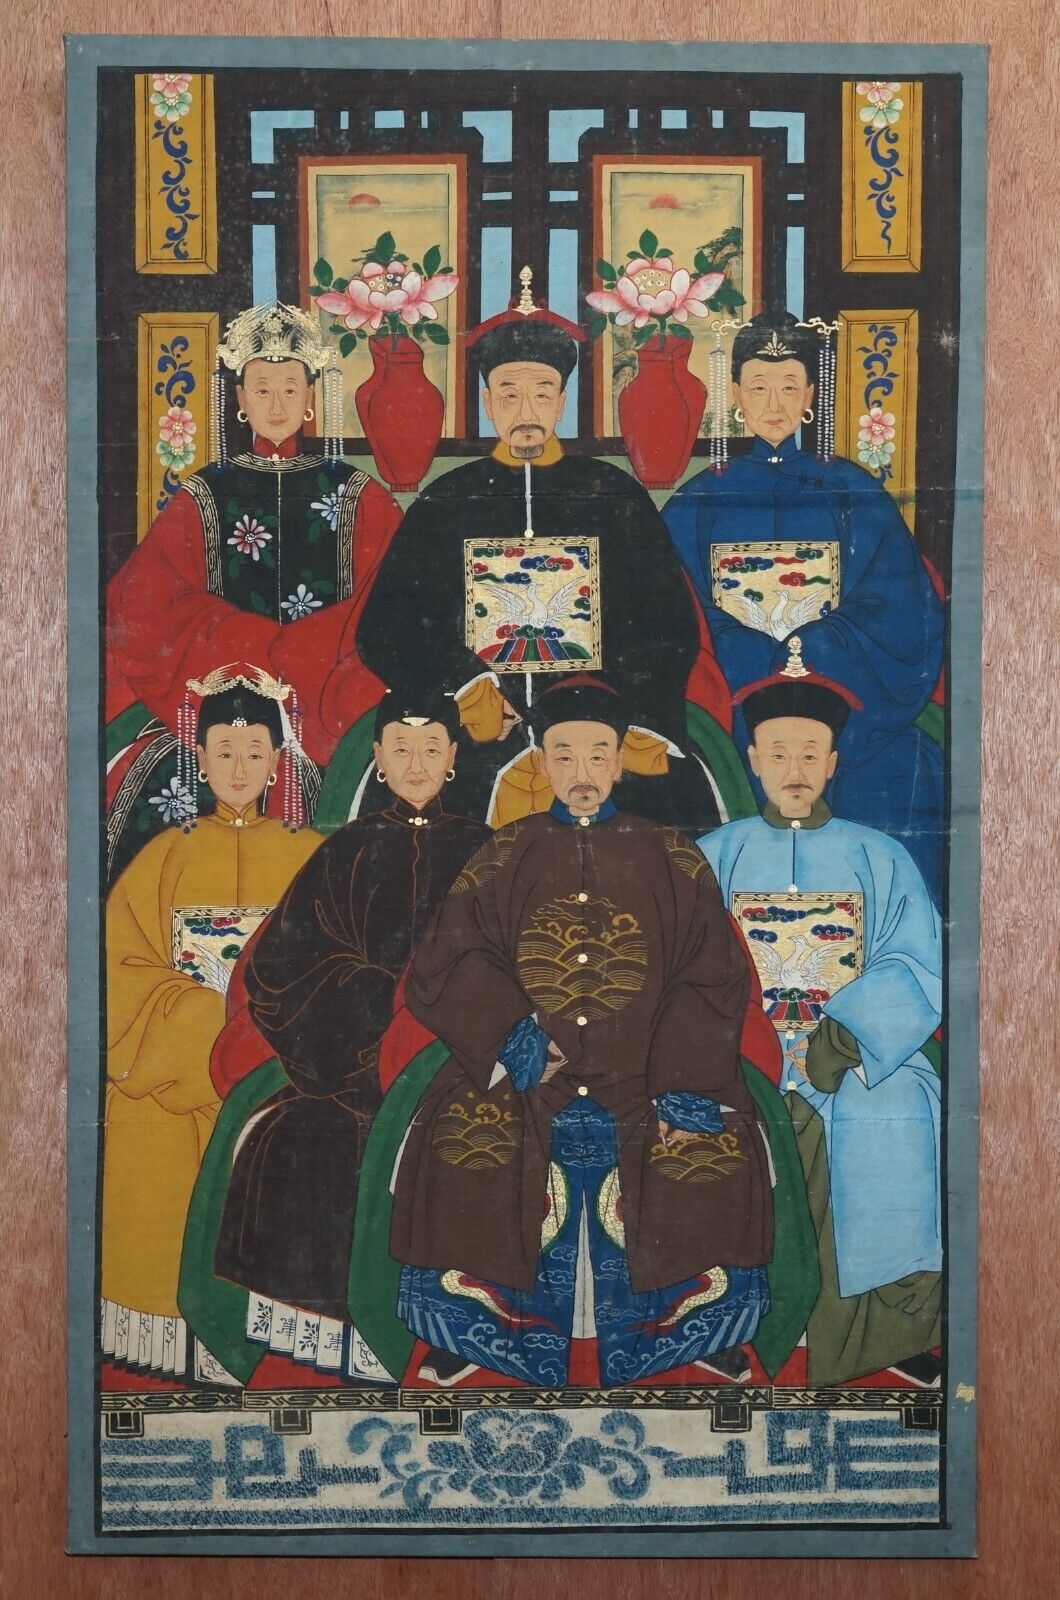 CIRCA 1880 CHINESE ANCESTRAL PORTRAIT PAINTING OIL SCROLL CANVAS PART OF SUITE